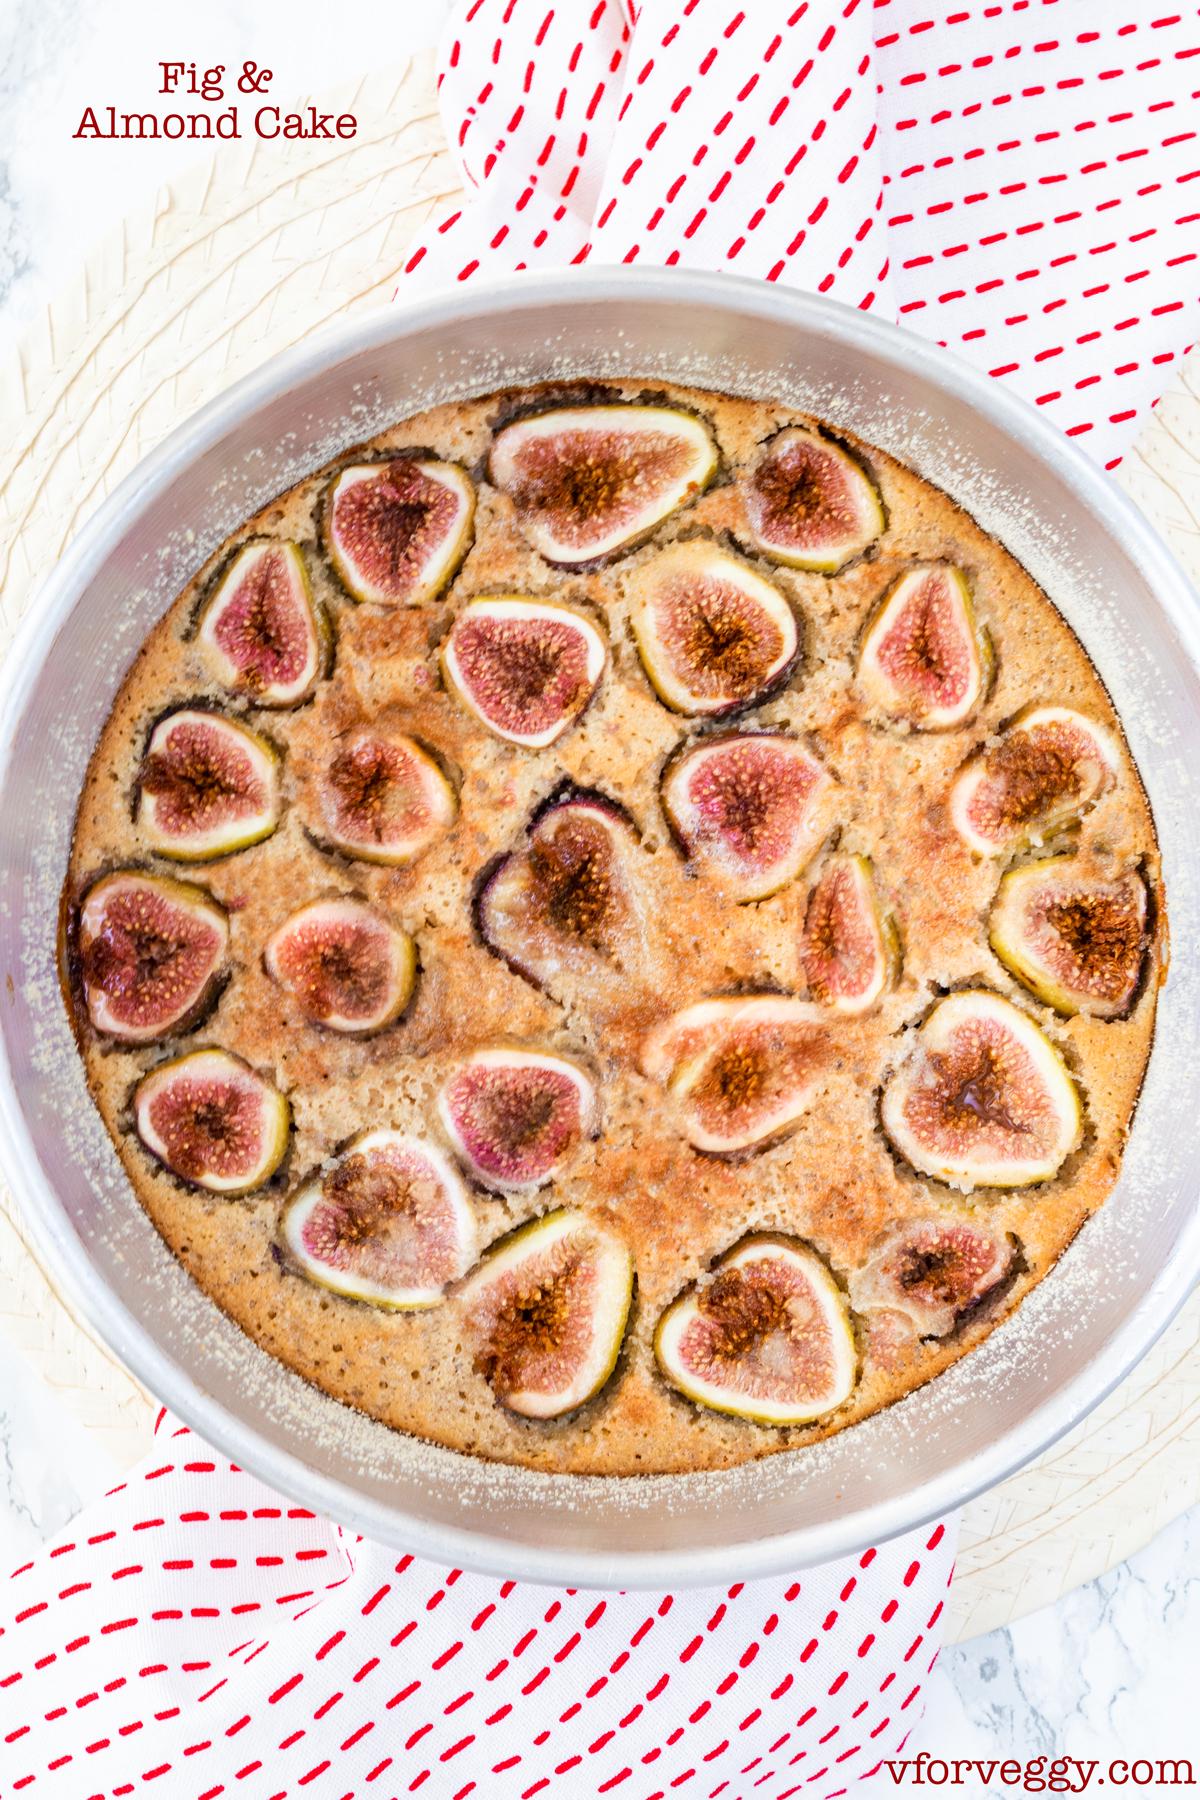 Broiled figs in peach sauce and Plum almond cake